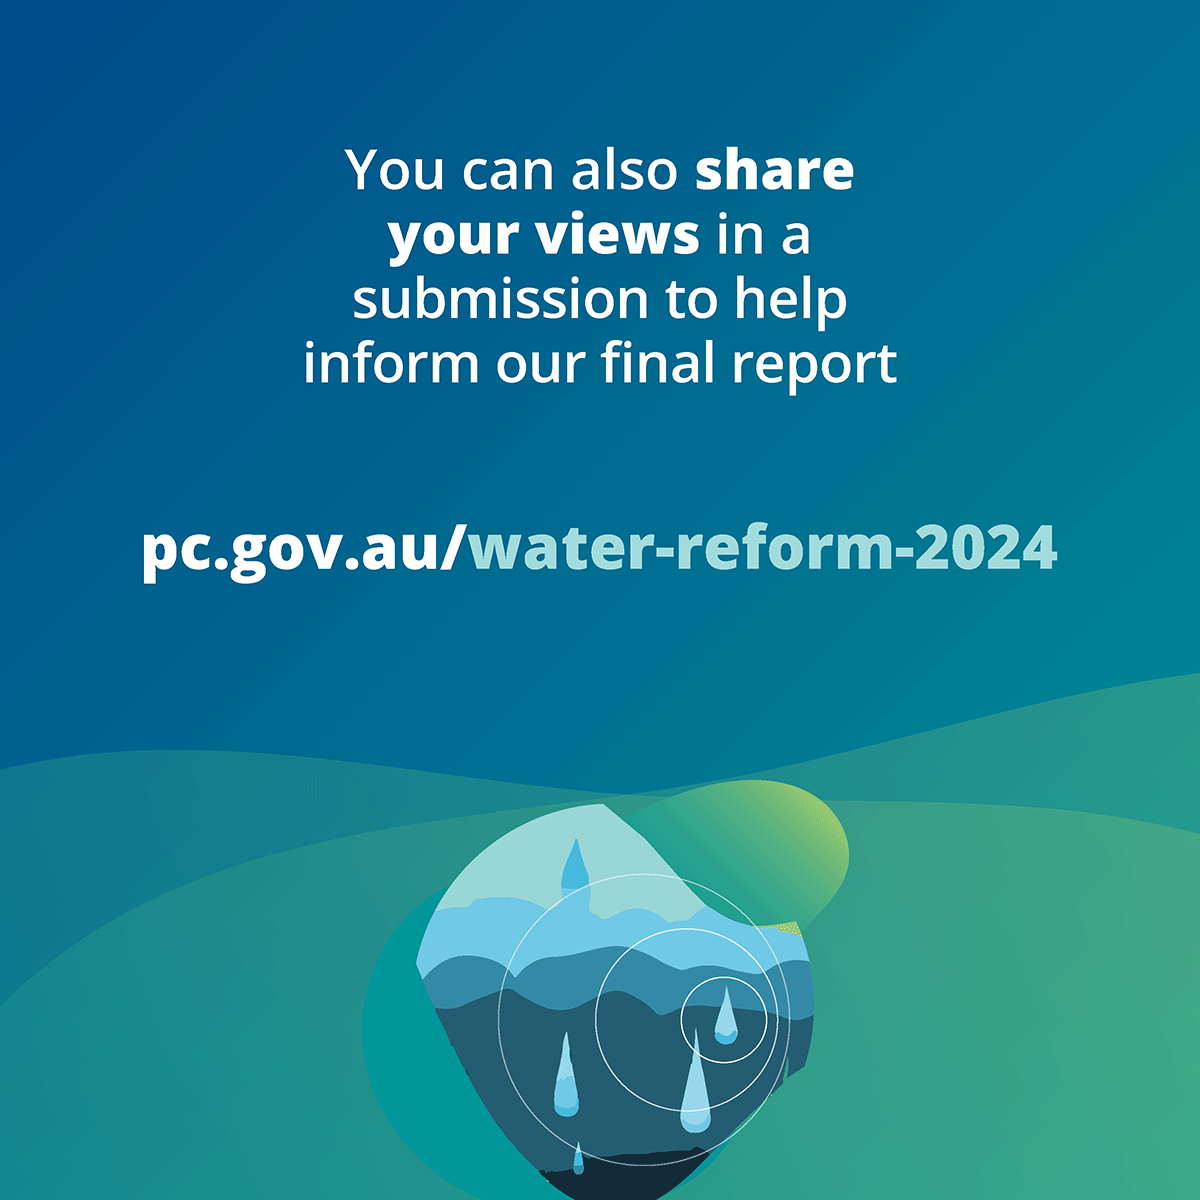 You can also share your views in a submission to help inform our final report. pc.gov.au/water-reform-2024